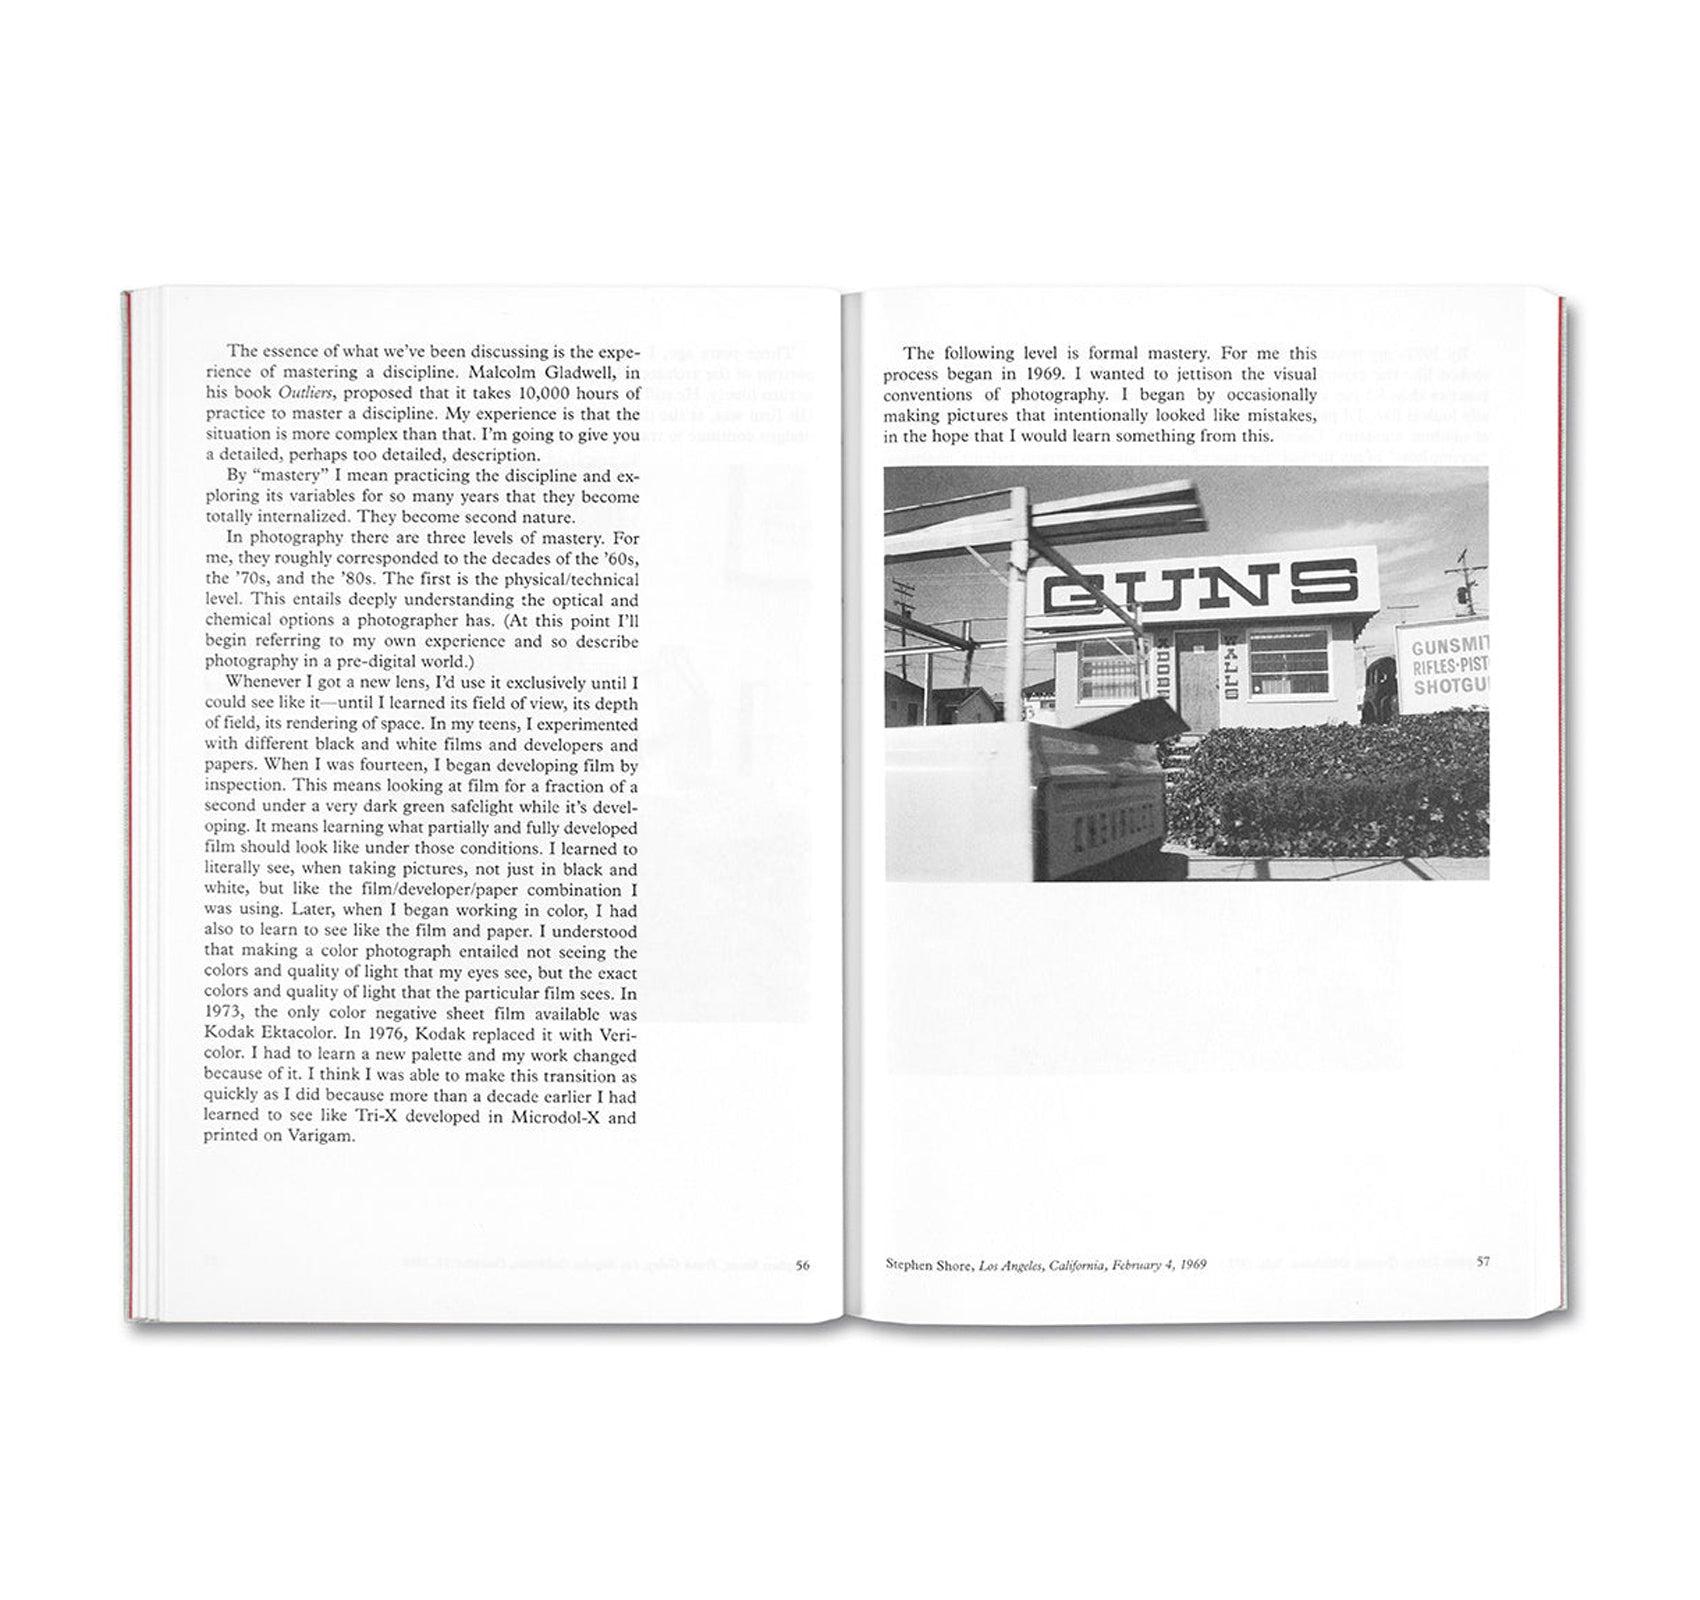 MODERN INSTANCES: THE CRAFT OF PHOTOGRAPHY by Stephen Shore